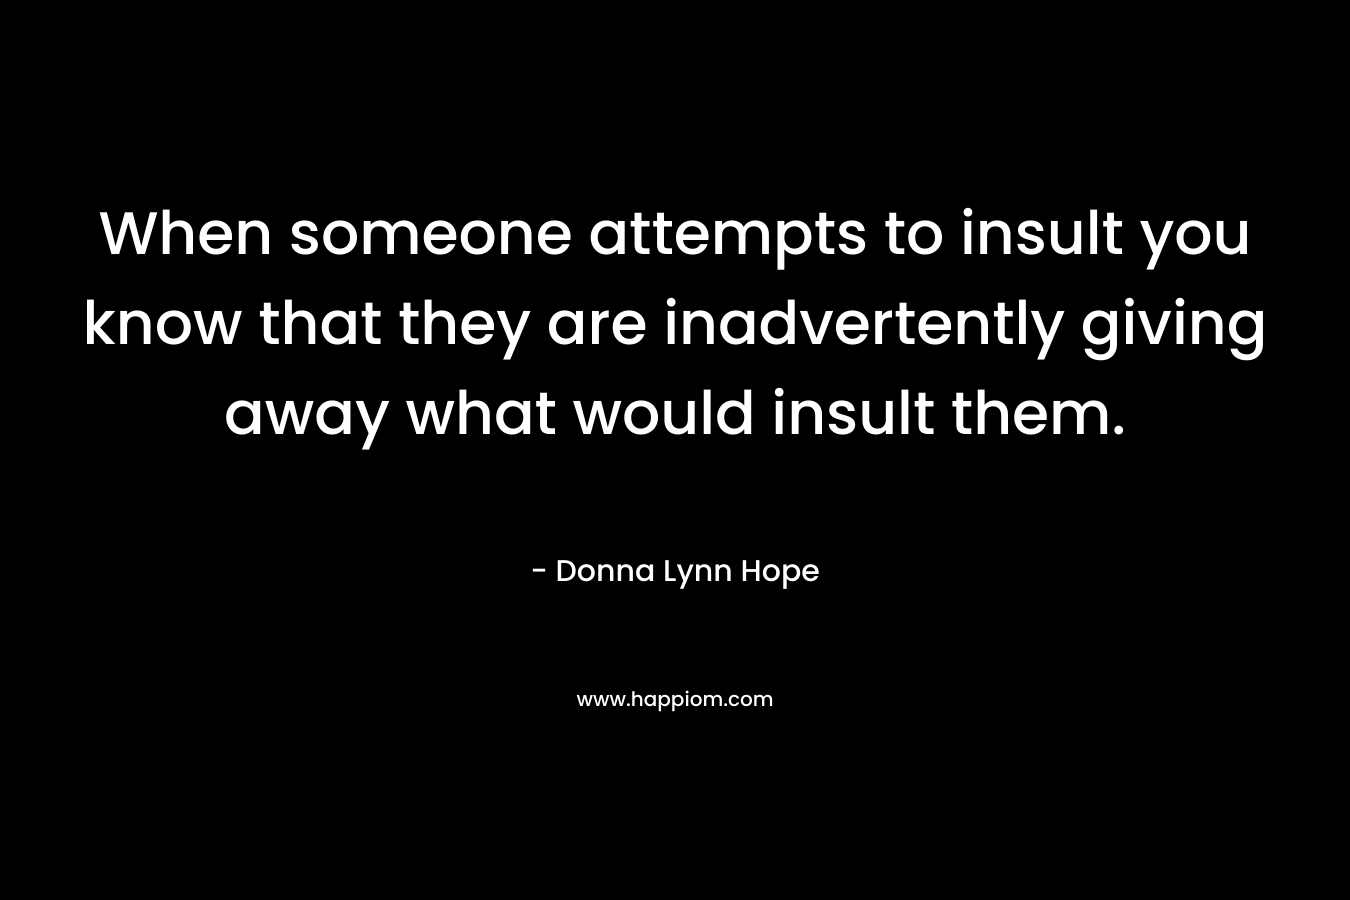 When someone attempts to insult you know that they are inadvertently giving away what would insult them.